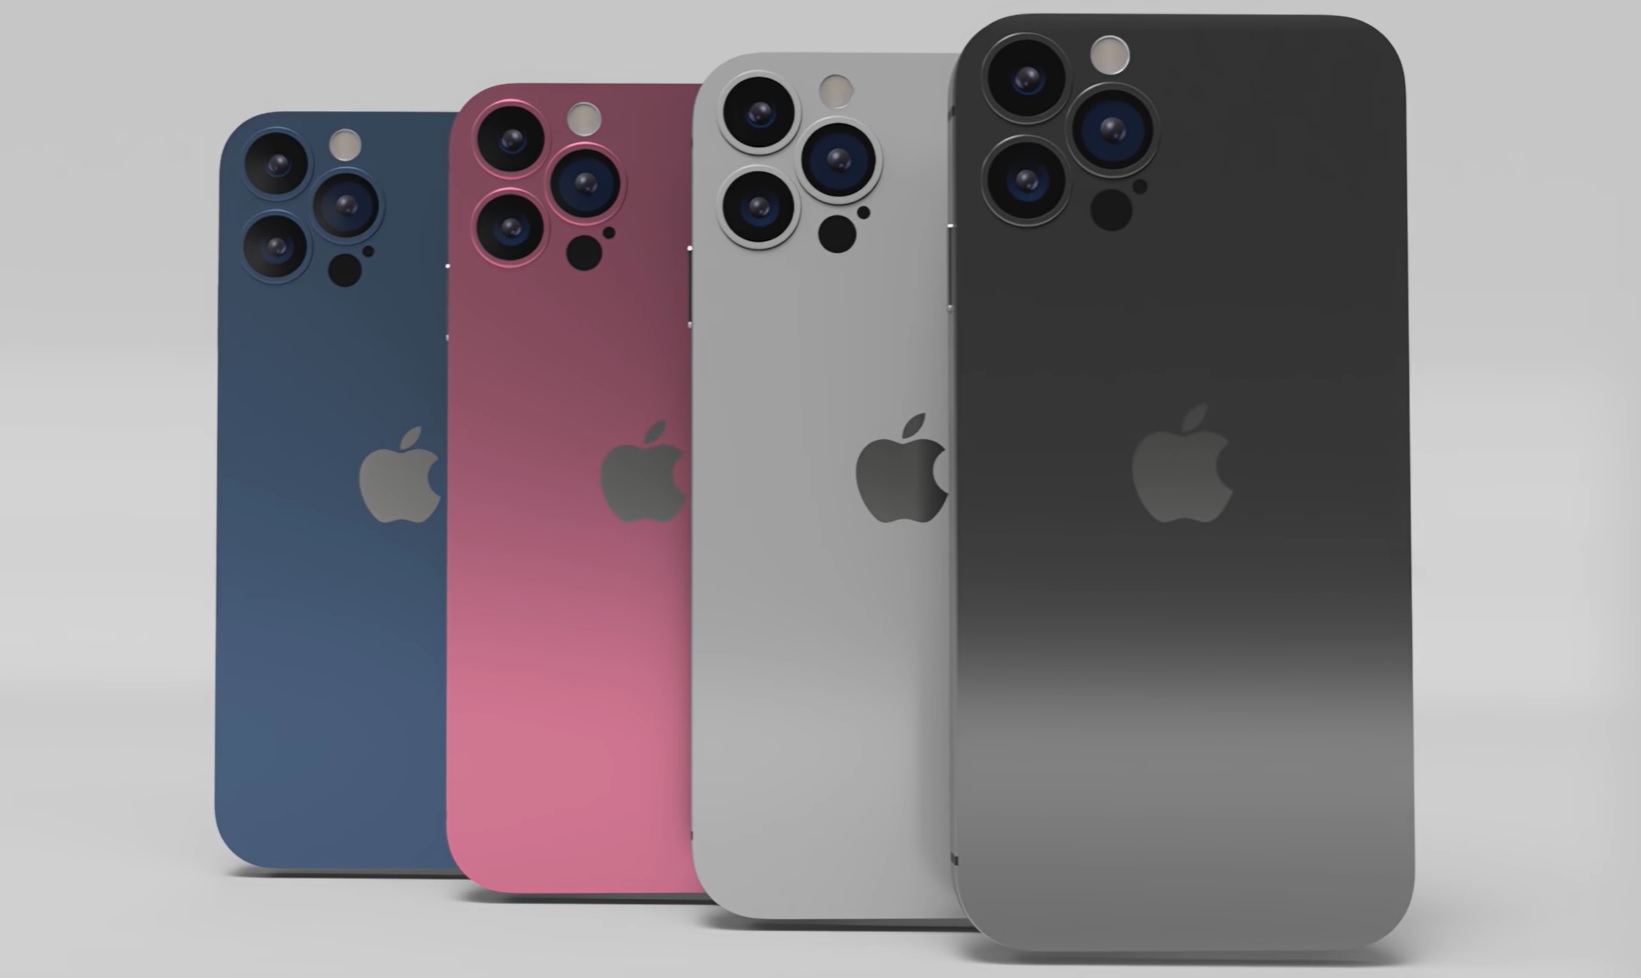 Alleged Iphone 14 Price Tags Show Hefty Increases For Pro And Pro Max Models Notebookcheck Net News